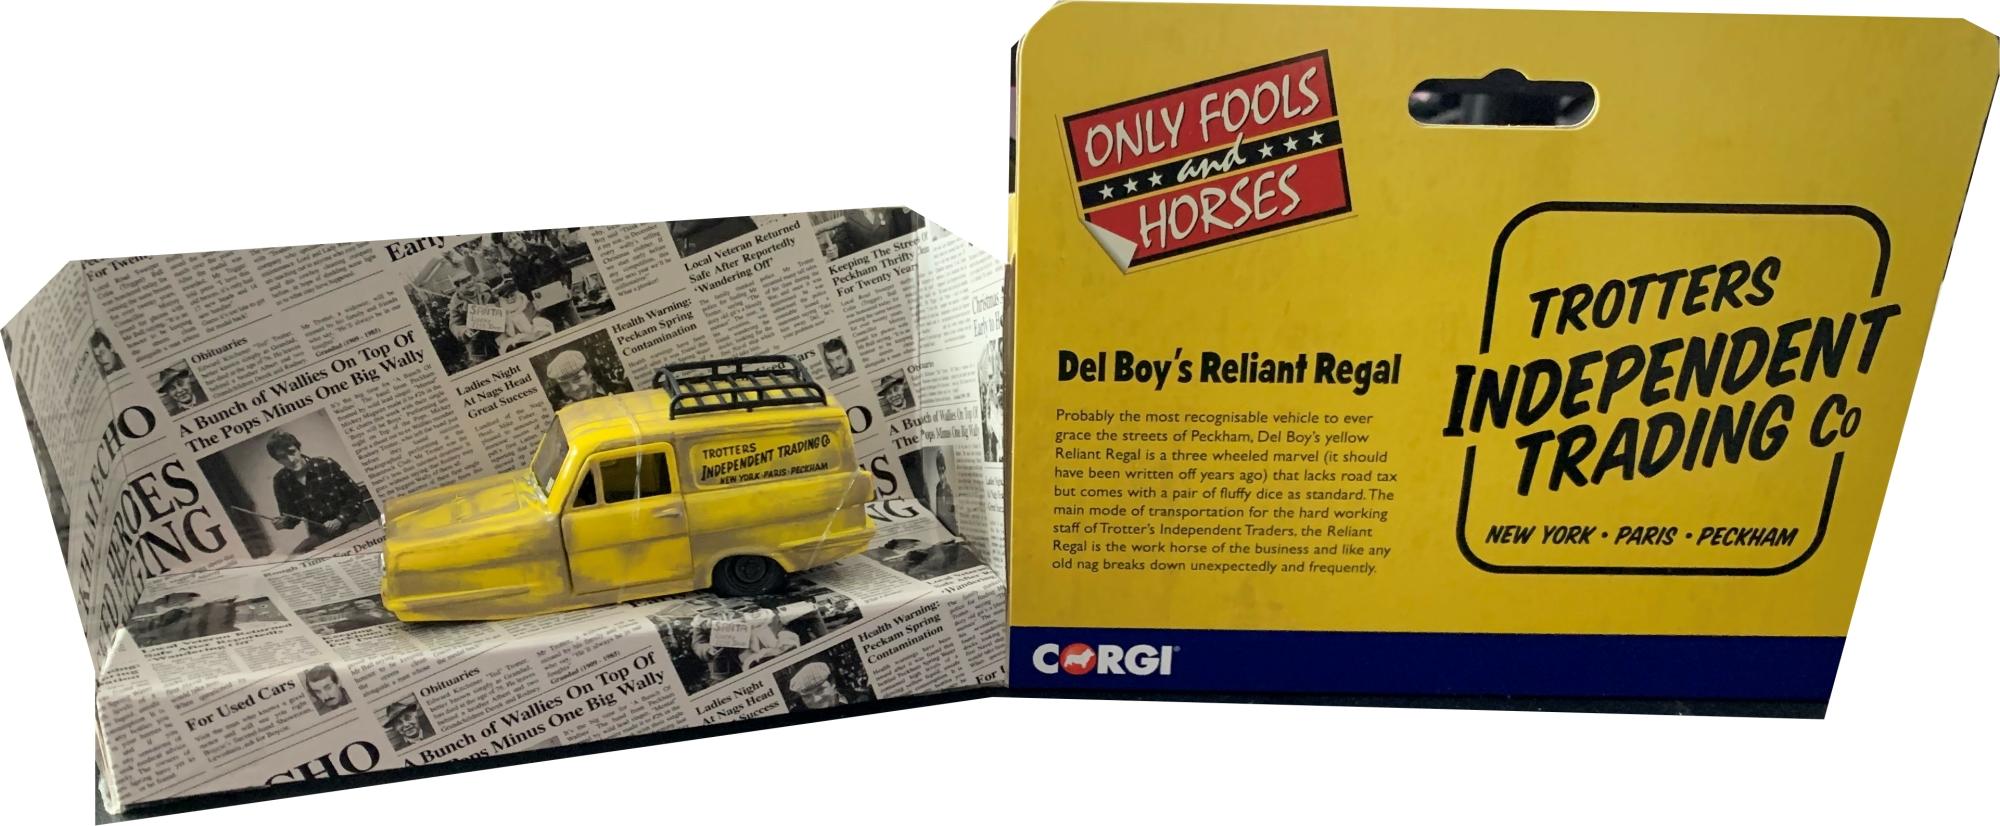 Only Fools and Horses Del Boy’s Reliant Regal in yellow 1:36 scale model